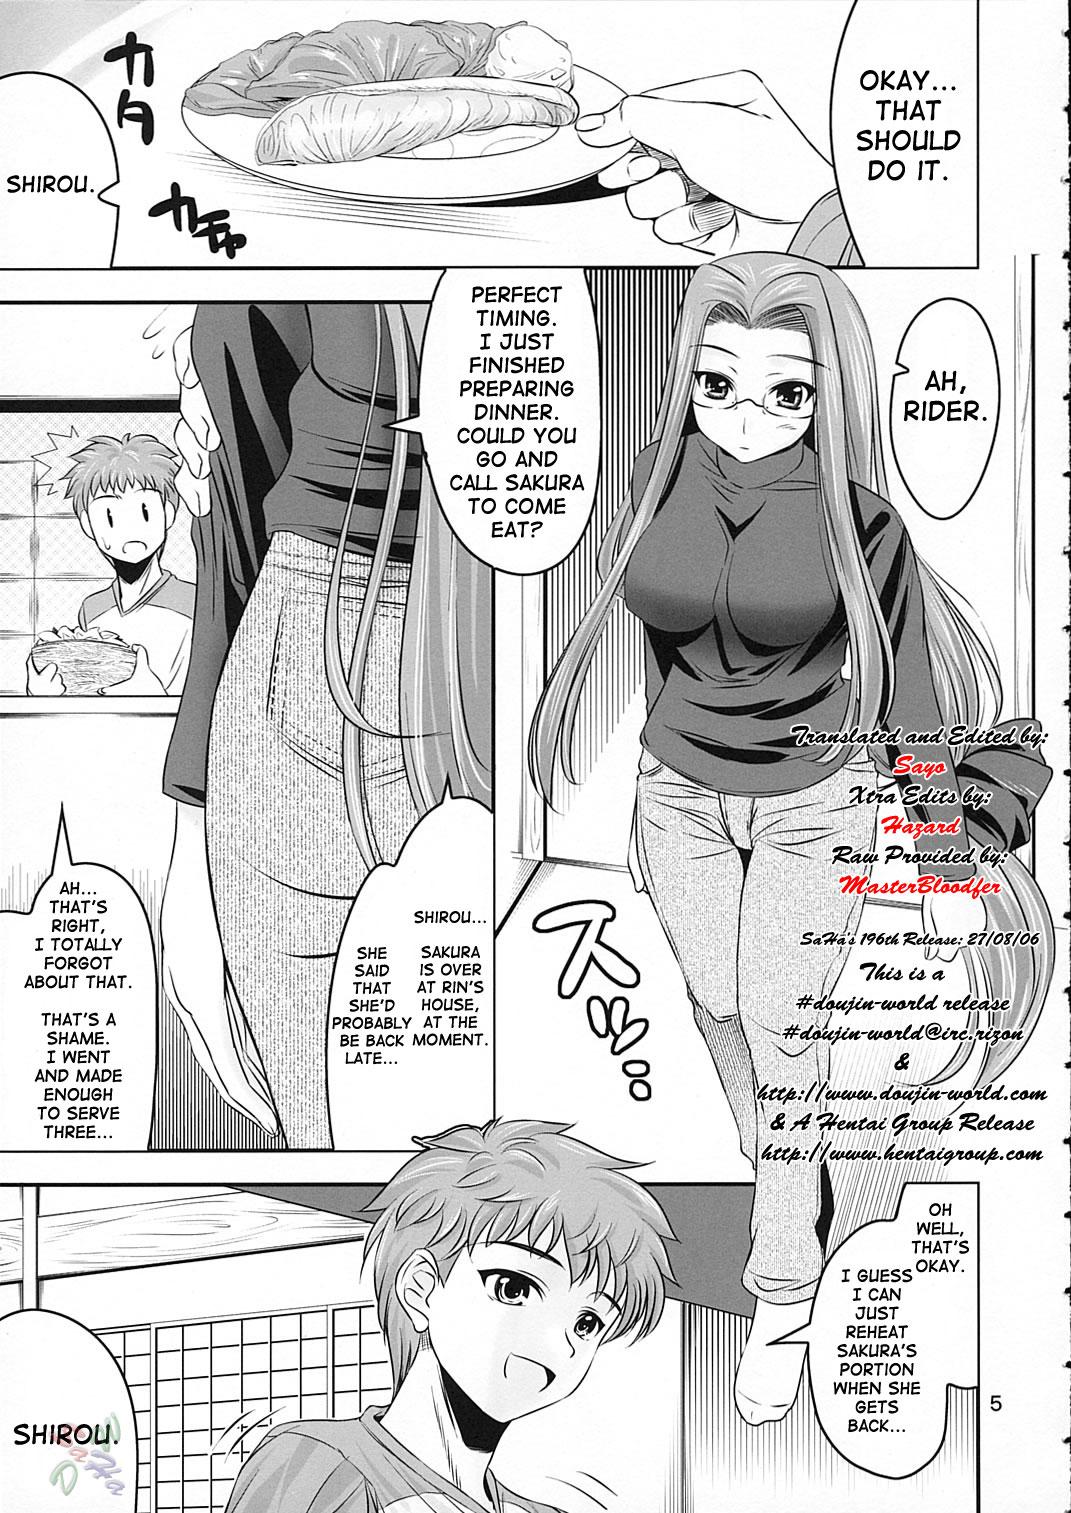 Long Hair Simiken - Fate stay night Cartoon - Page 5